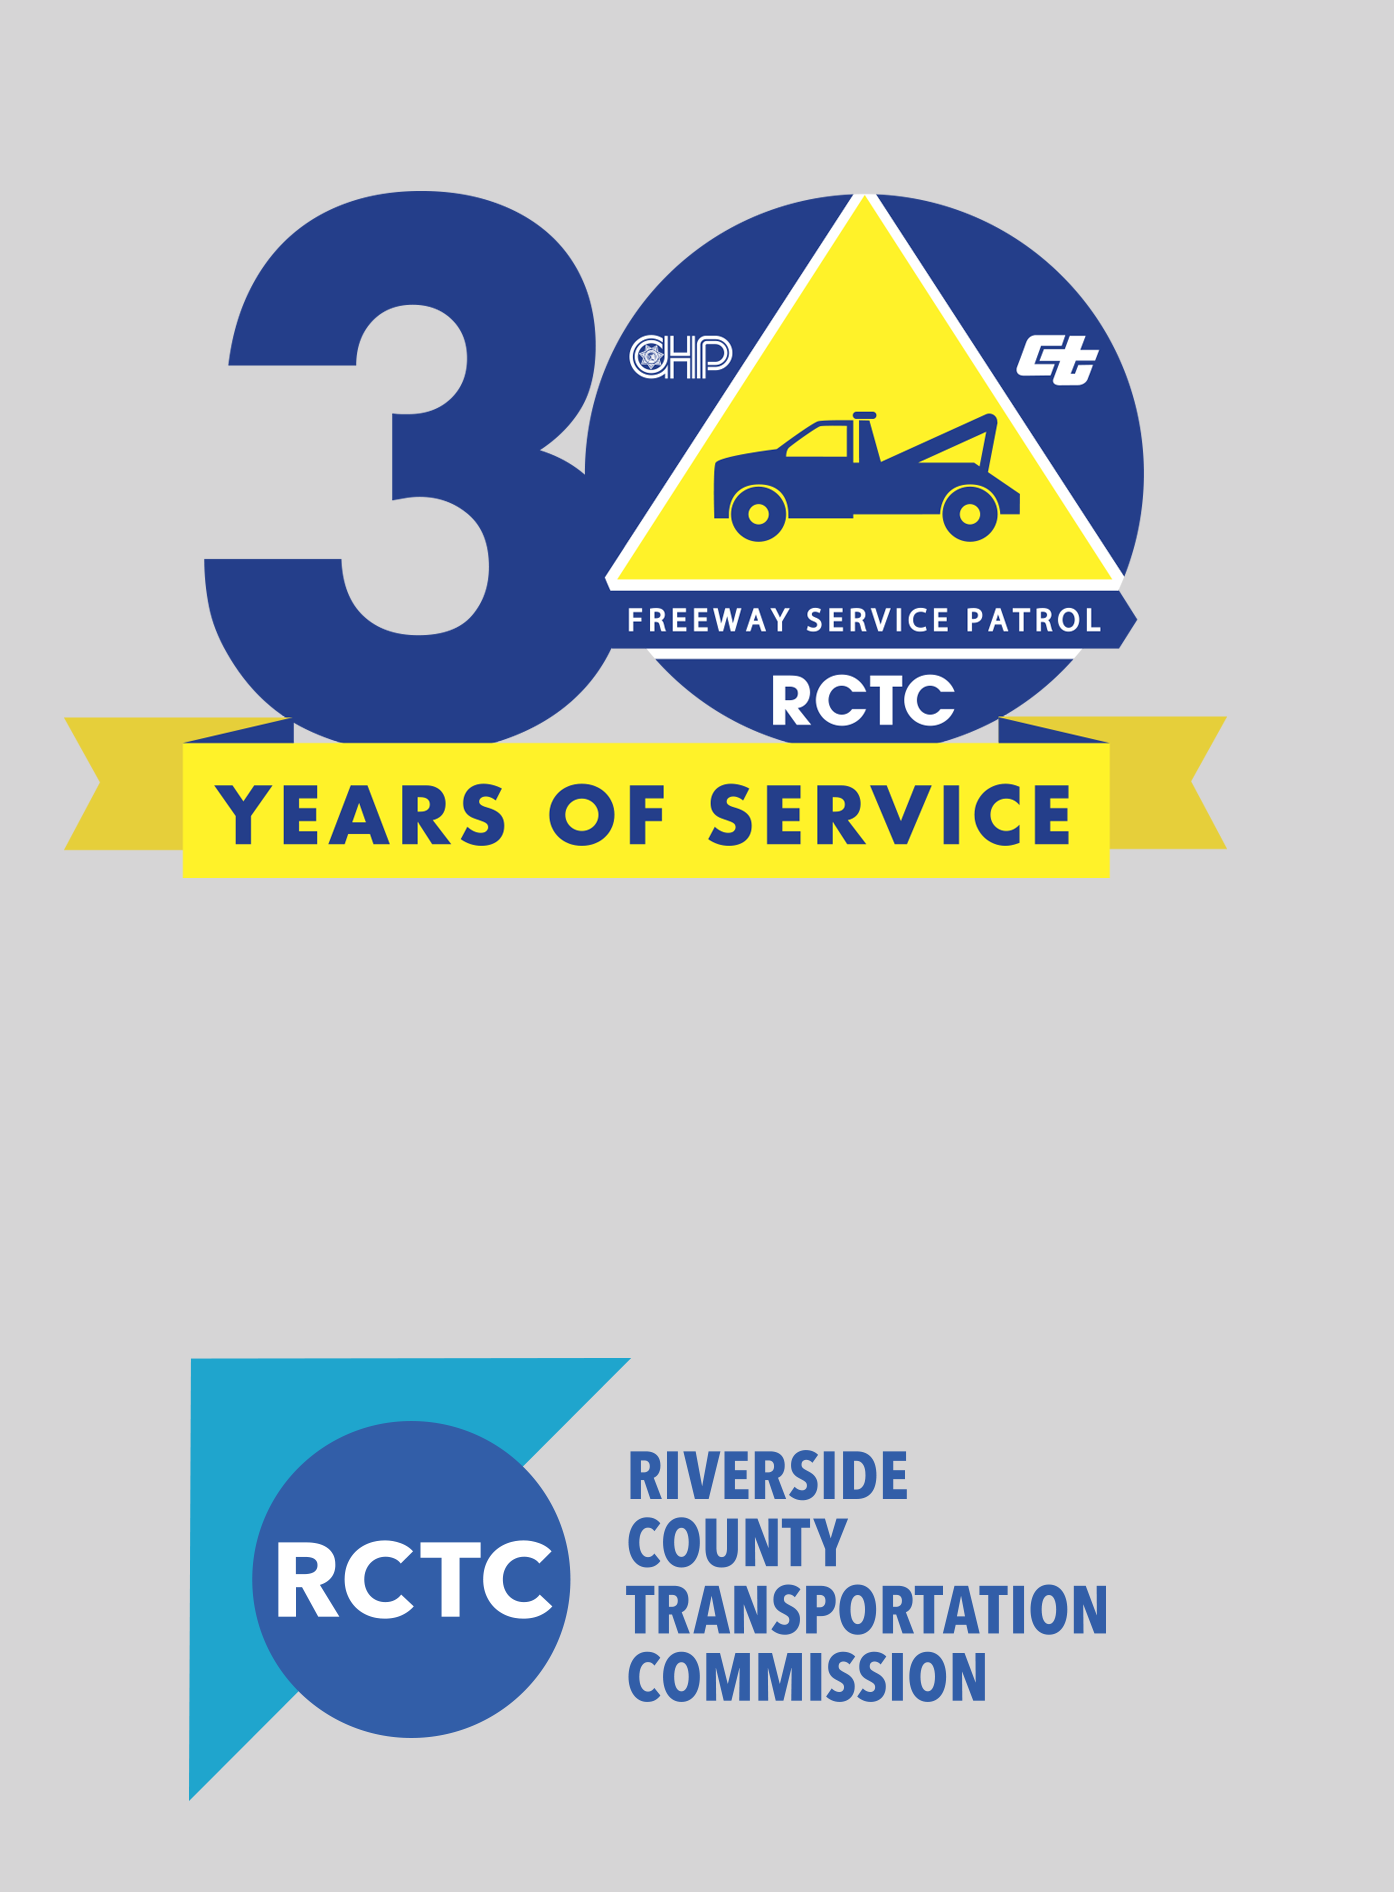 Free Way Service Patrol and RCT 40th Anniversary